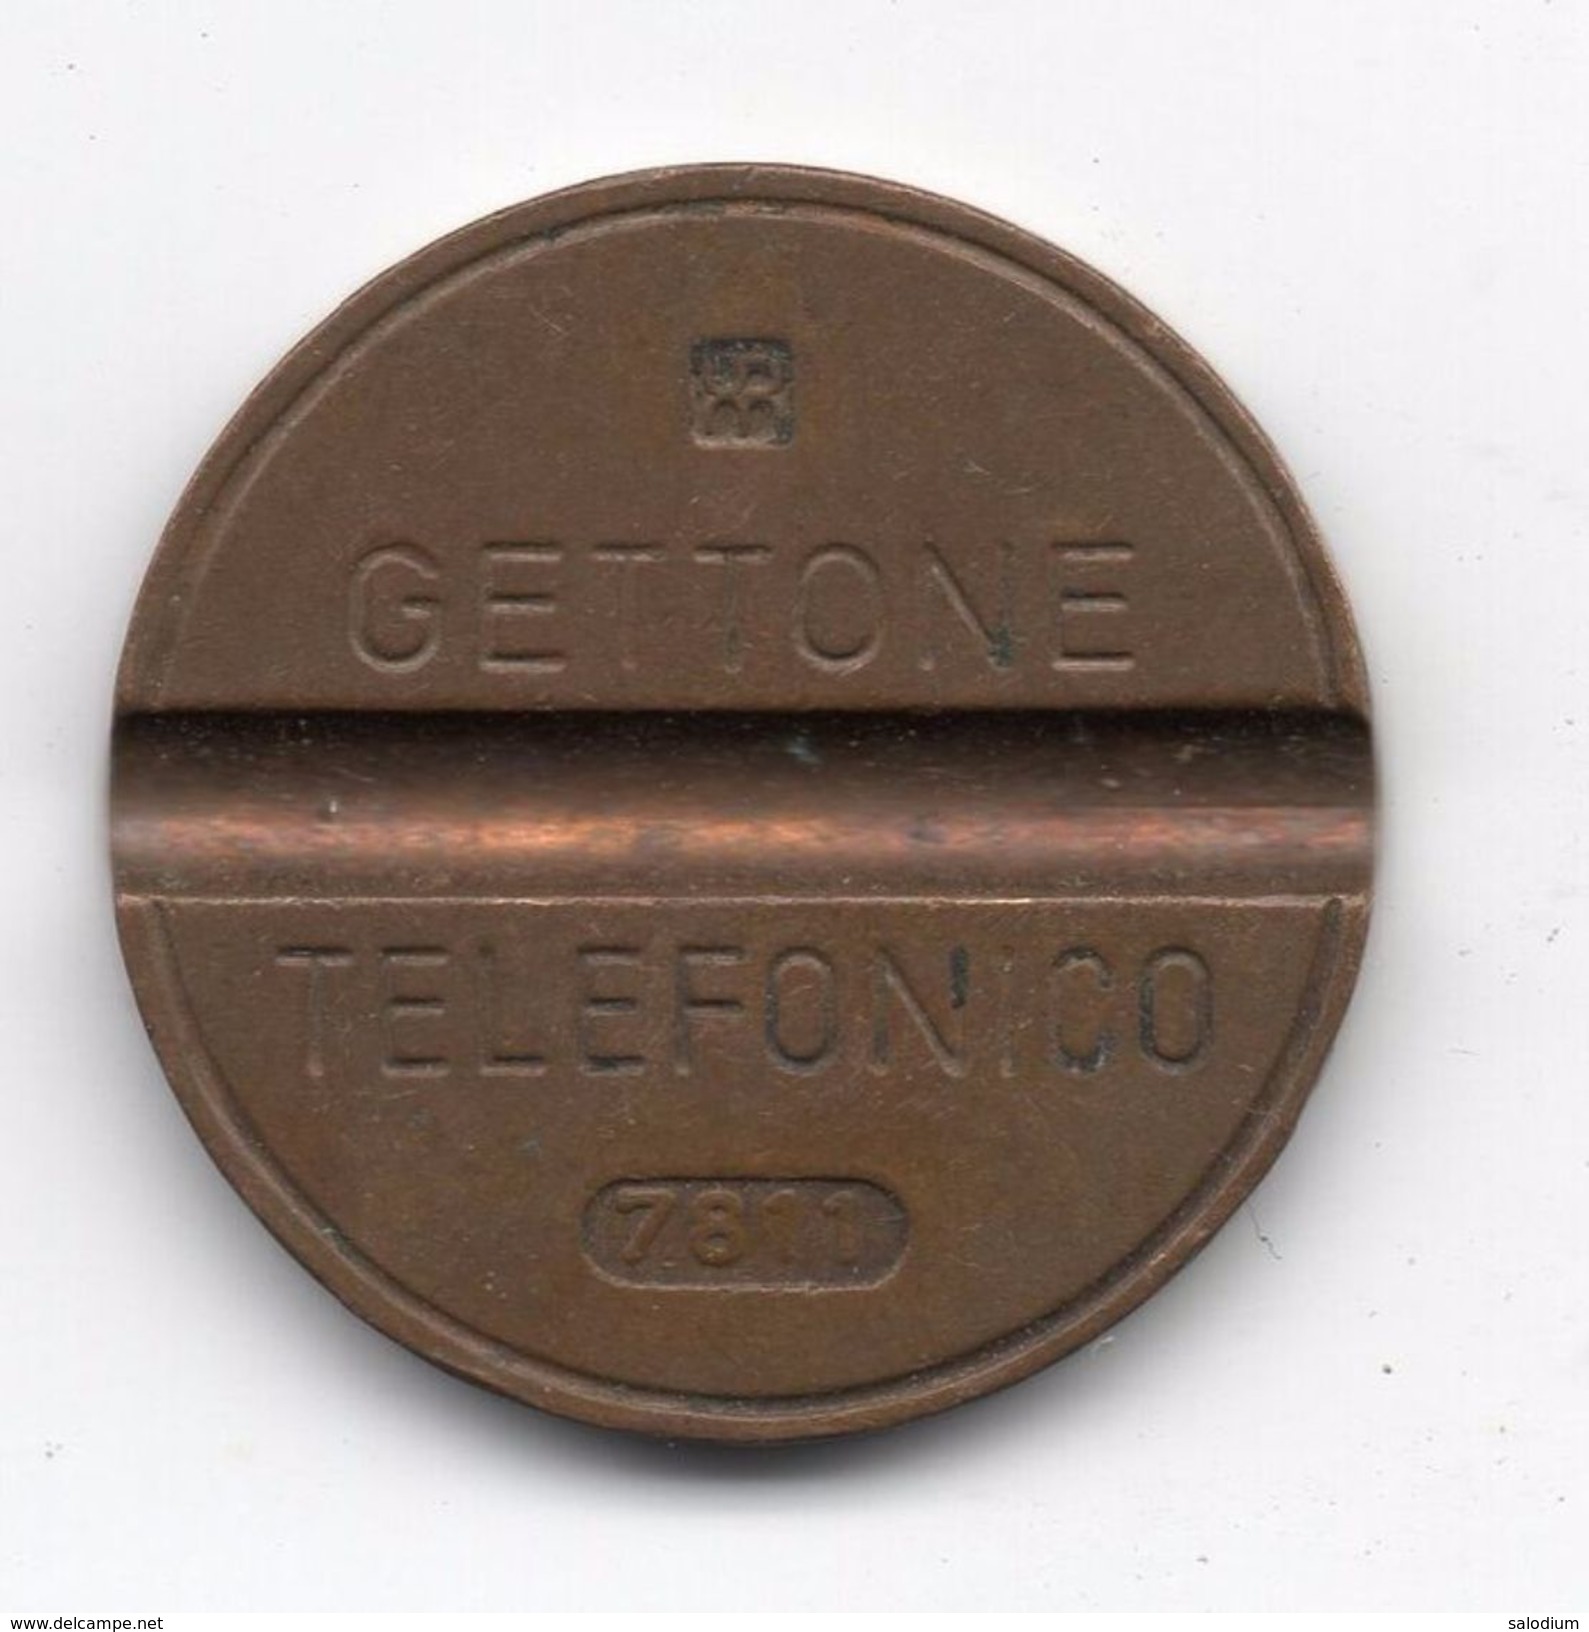 Gettone Telefonico 7811 Token Telephone - (Id-780) - Professionals/Firms